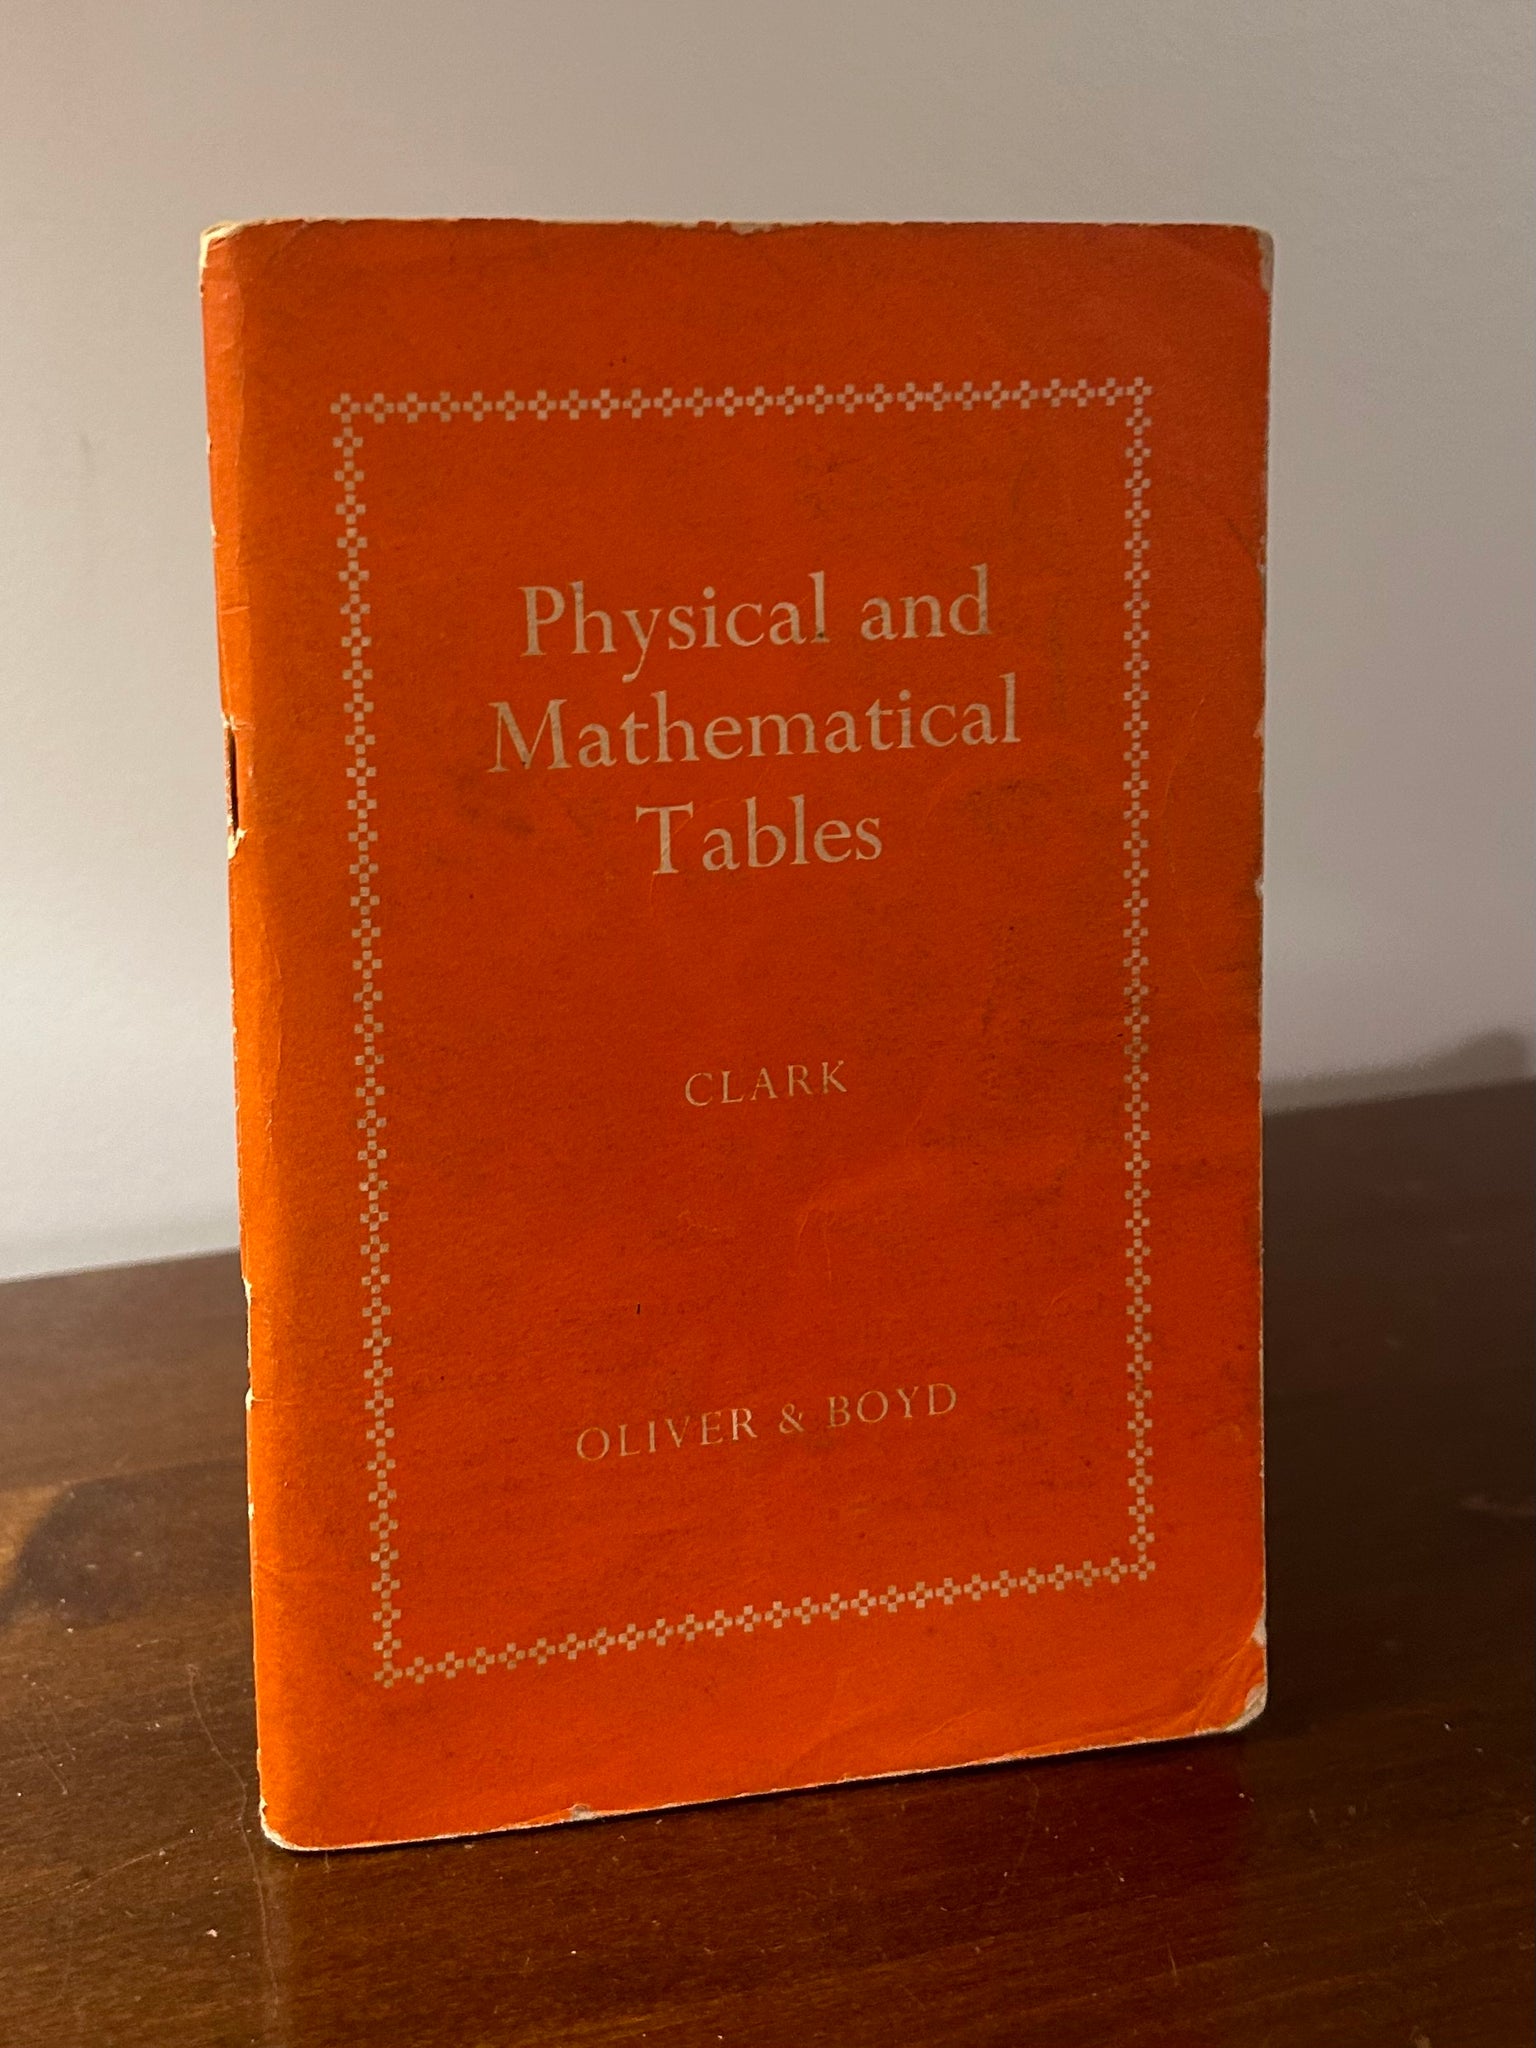 Physical and Mathematical Tables